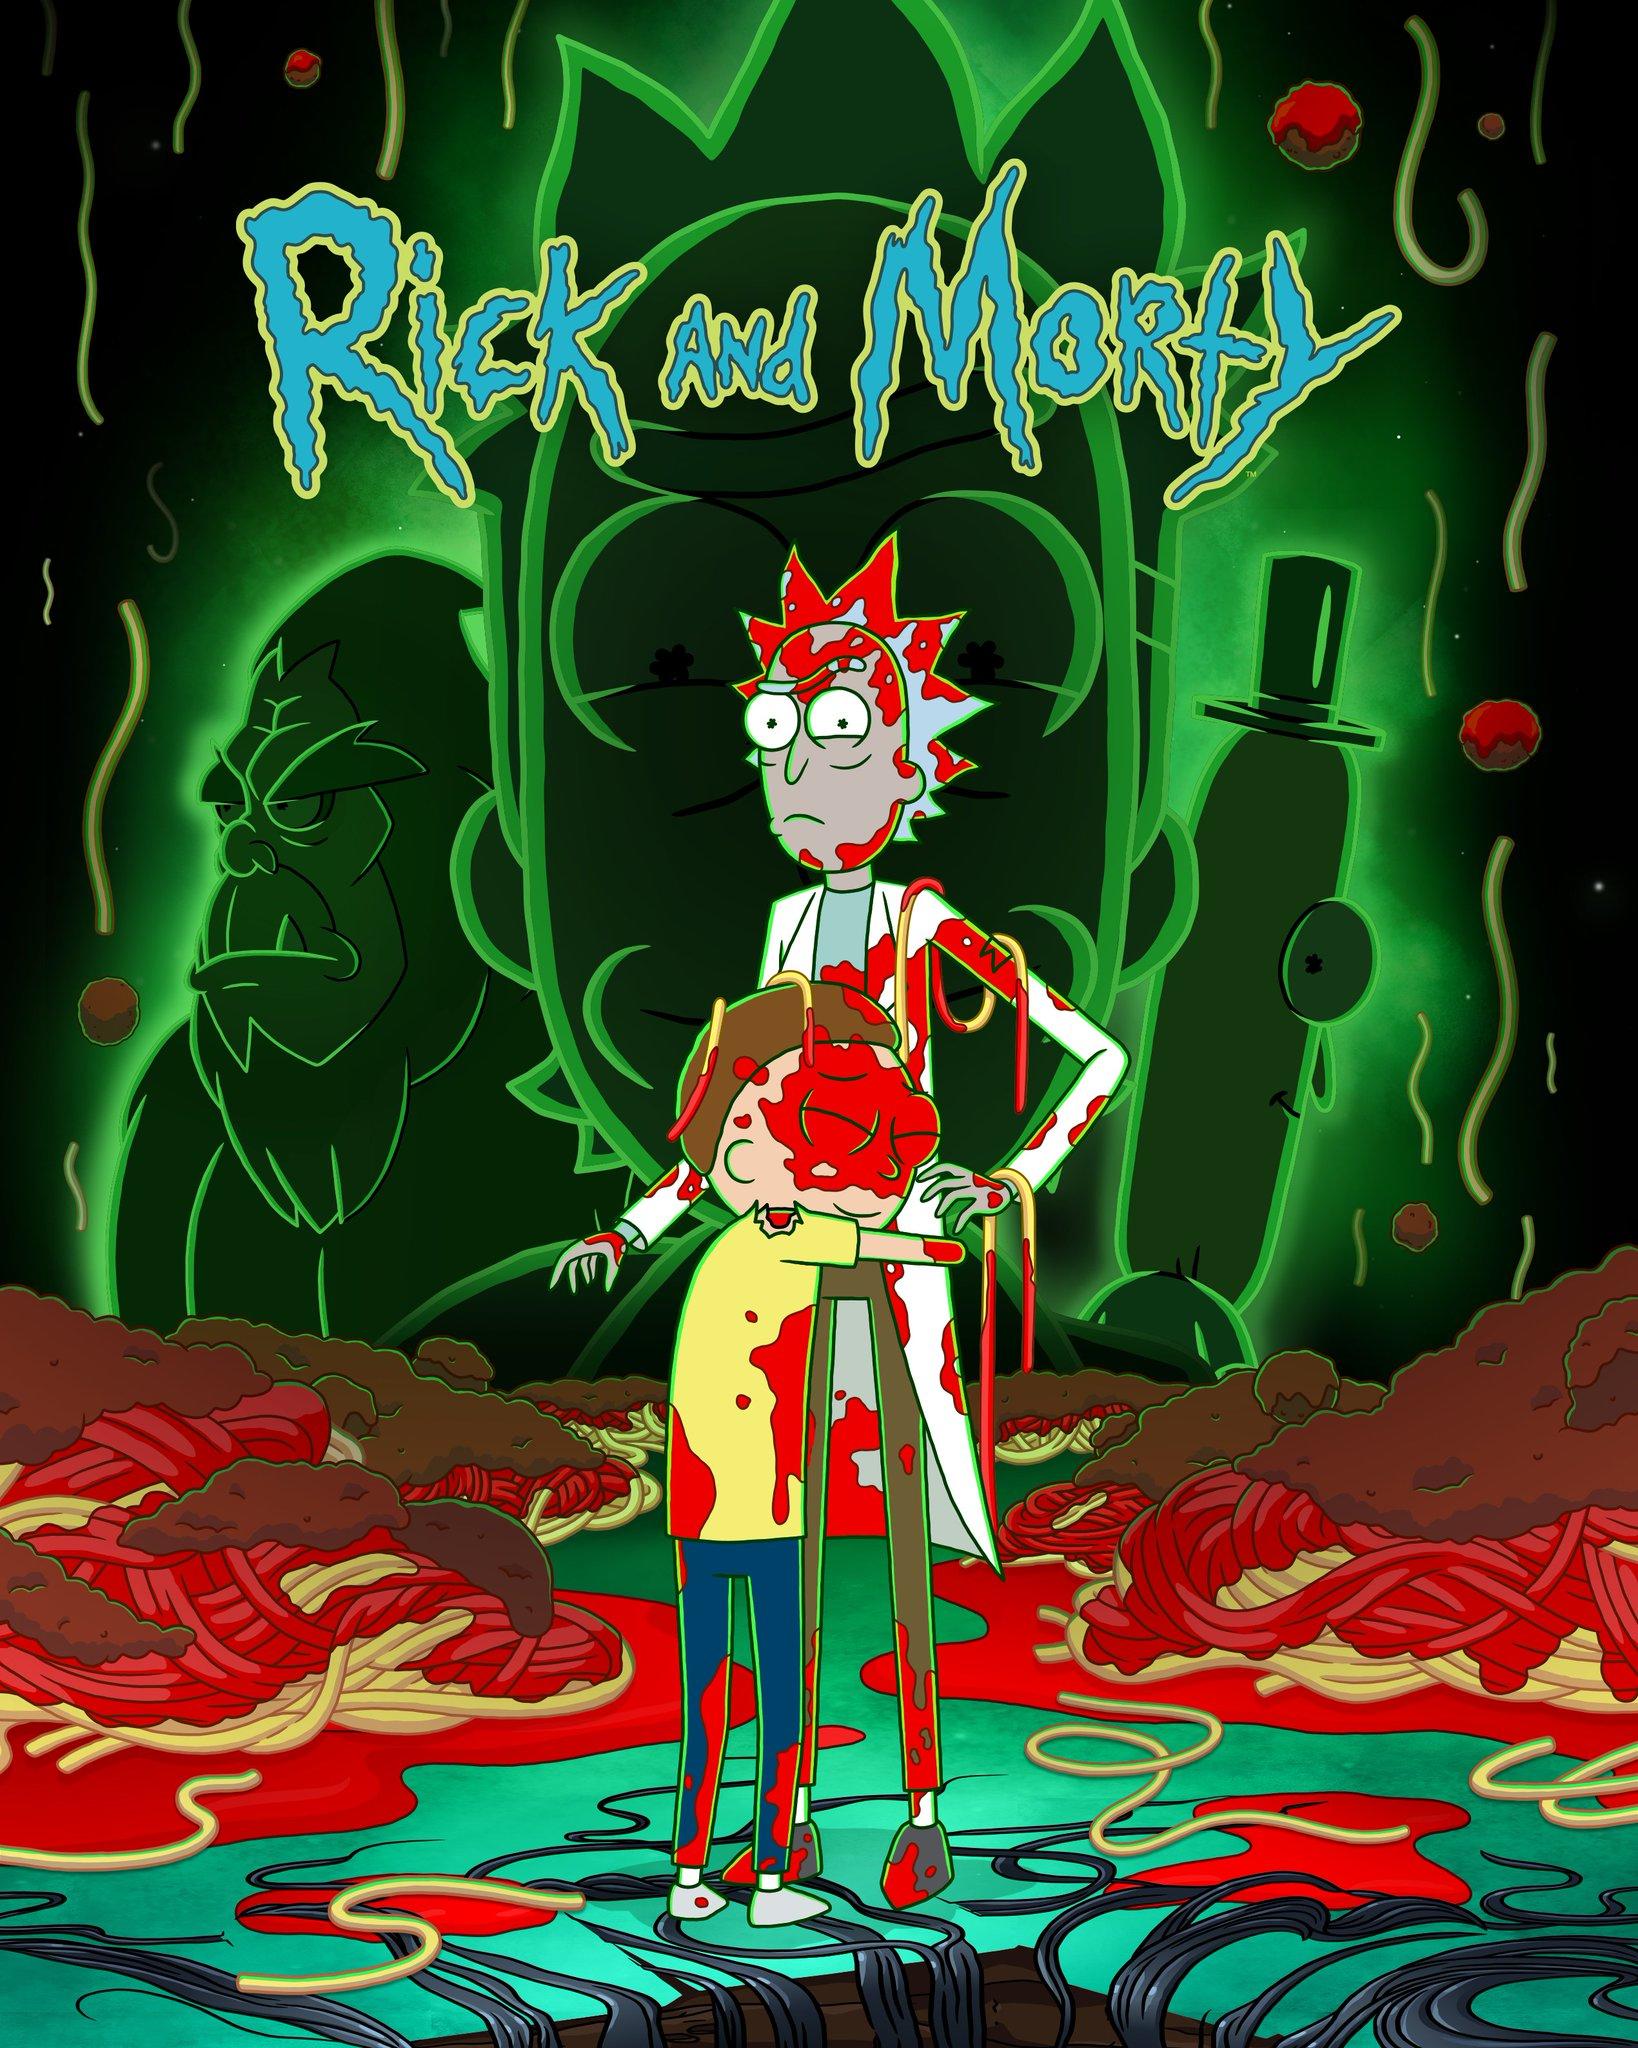 Rick and Morty Season 7 Trailer Announced With New Poster